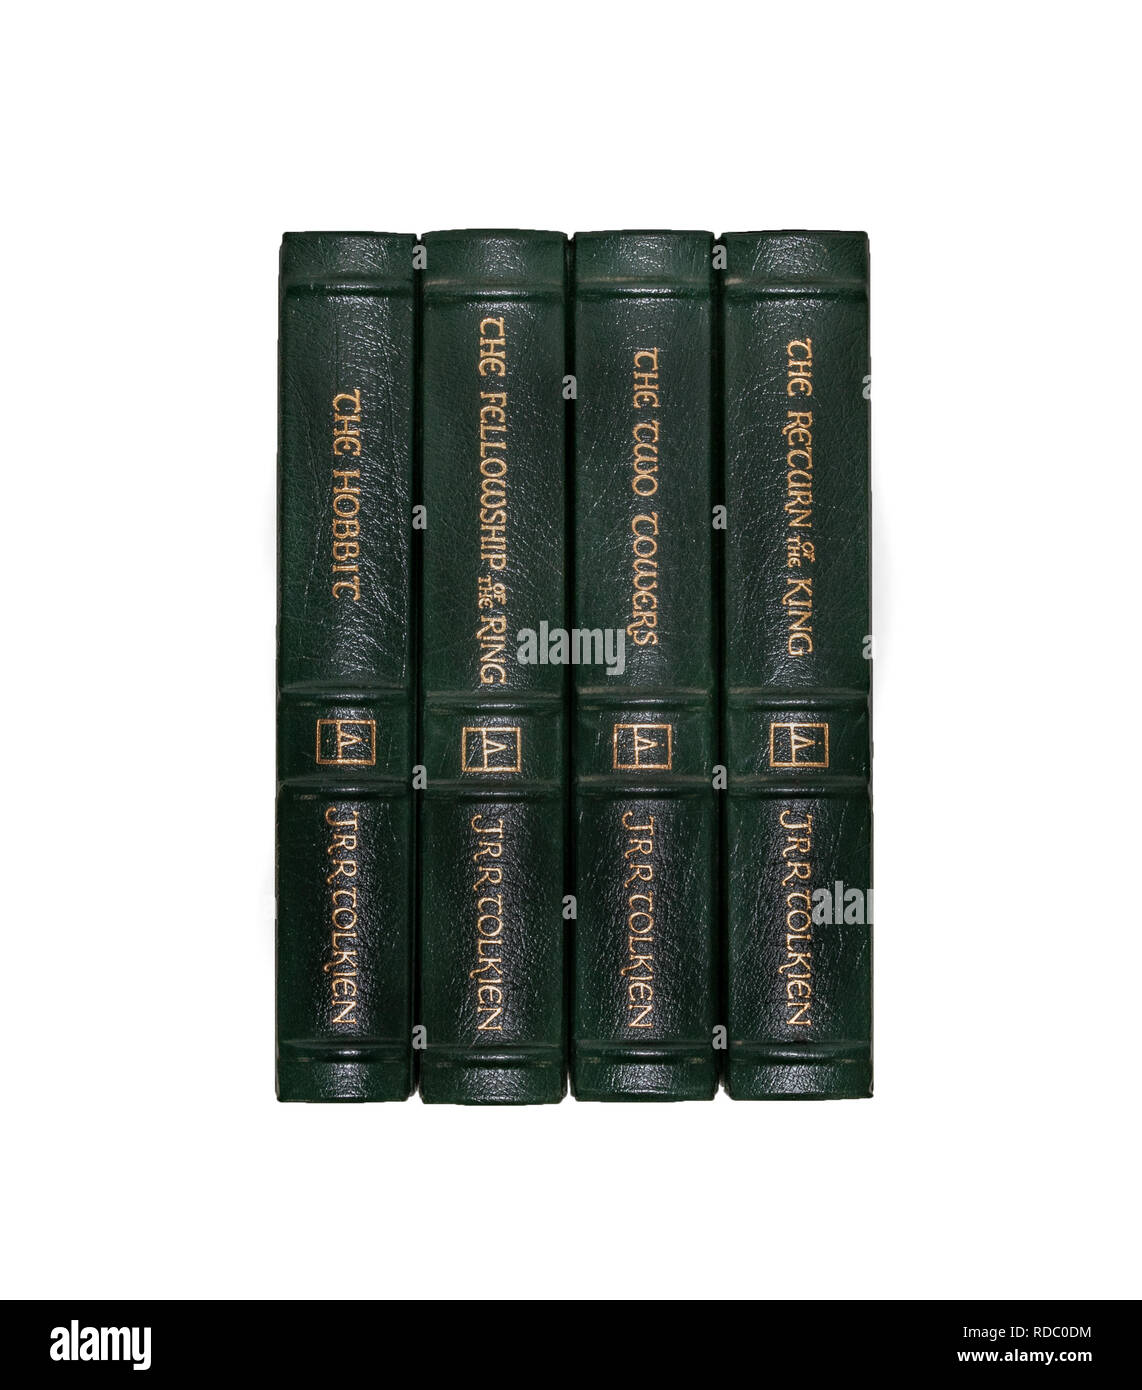 The Easton Press leather-bound editions of Tolkein's 'The Hobbit' and 3 volume 'Lord of the Rings'. Stock Photo